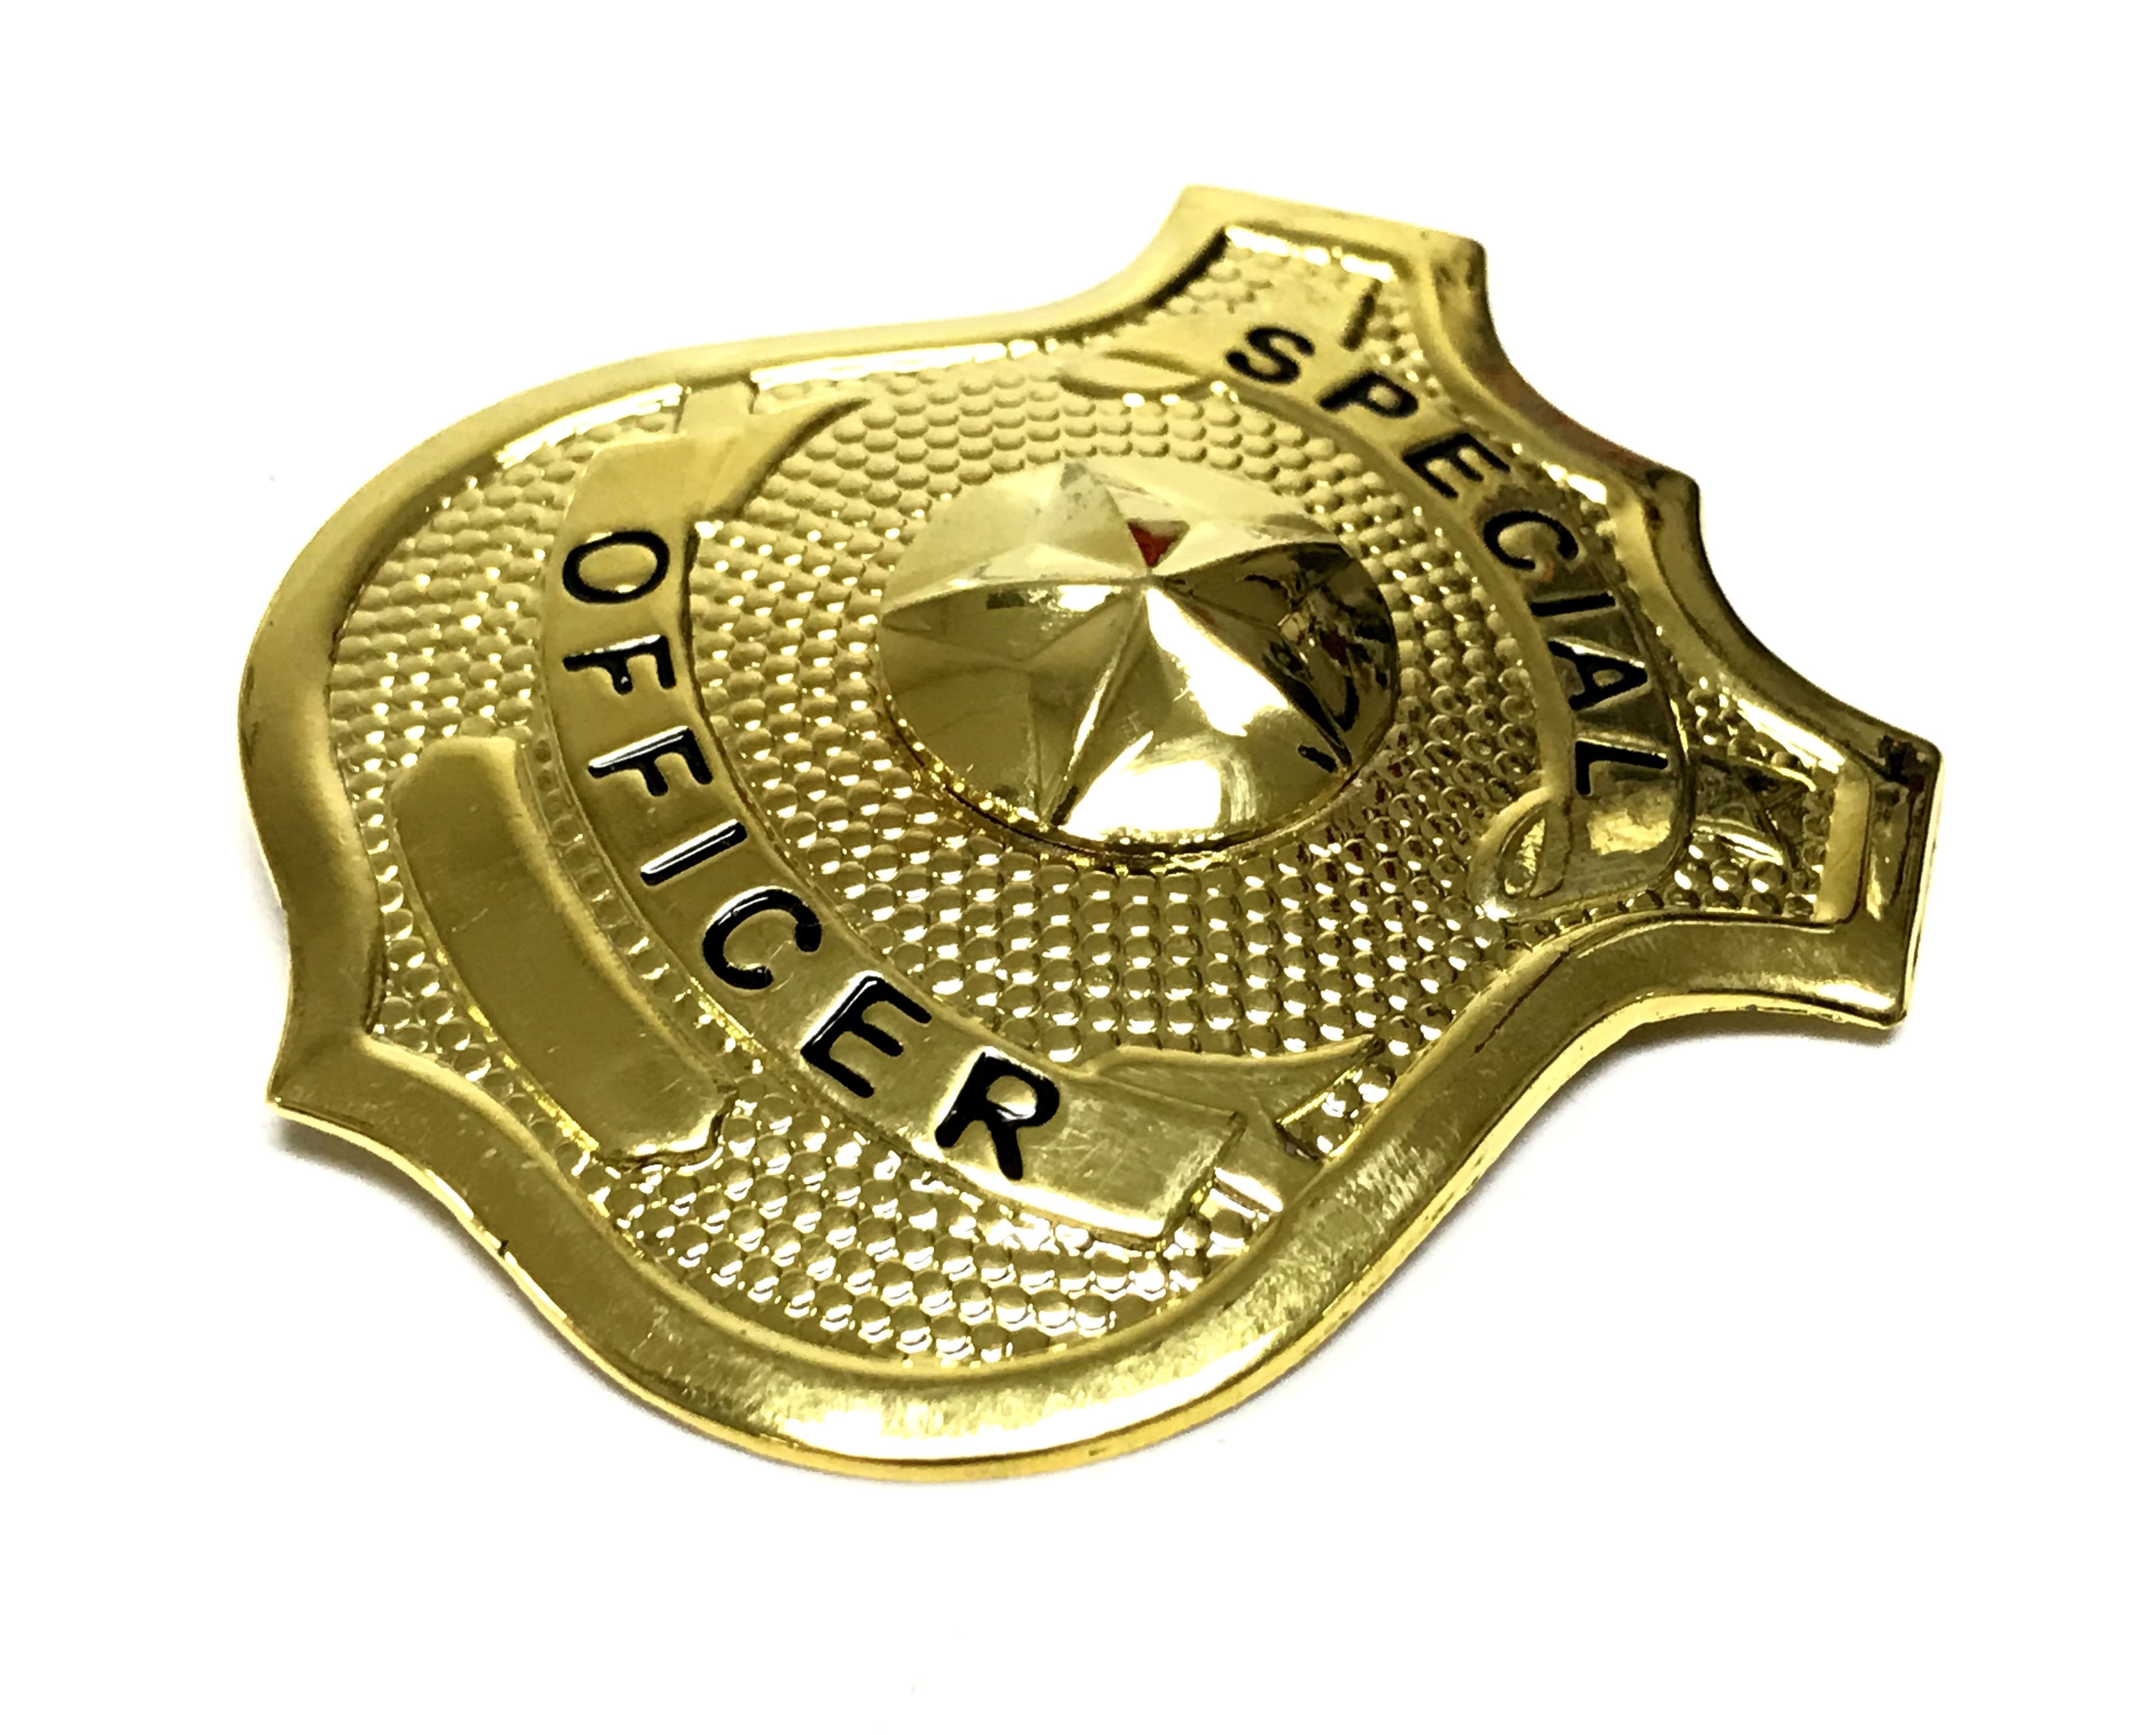 Metal Special Officer Police Style Badge Prop with Pin Back Closure - GOLD